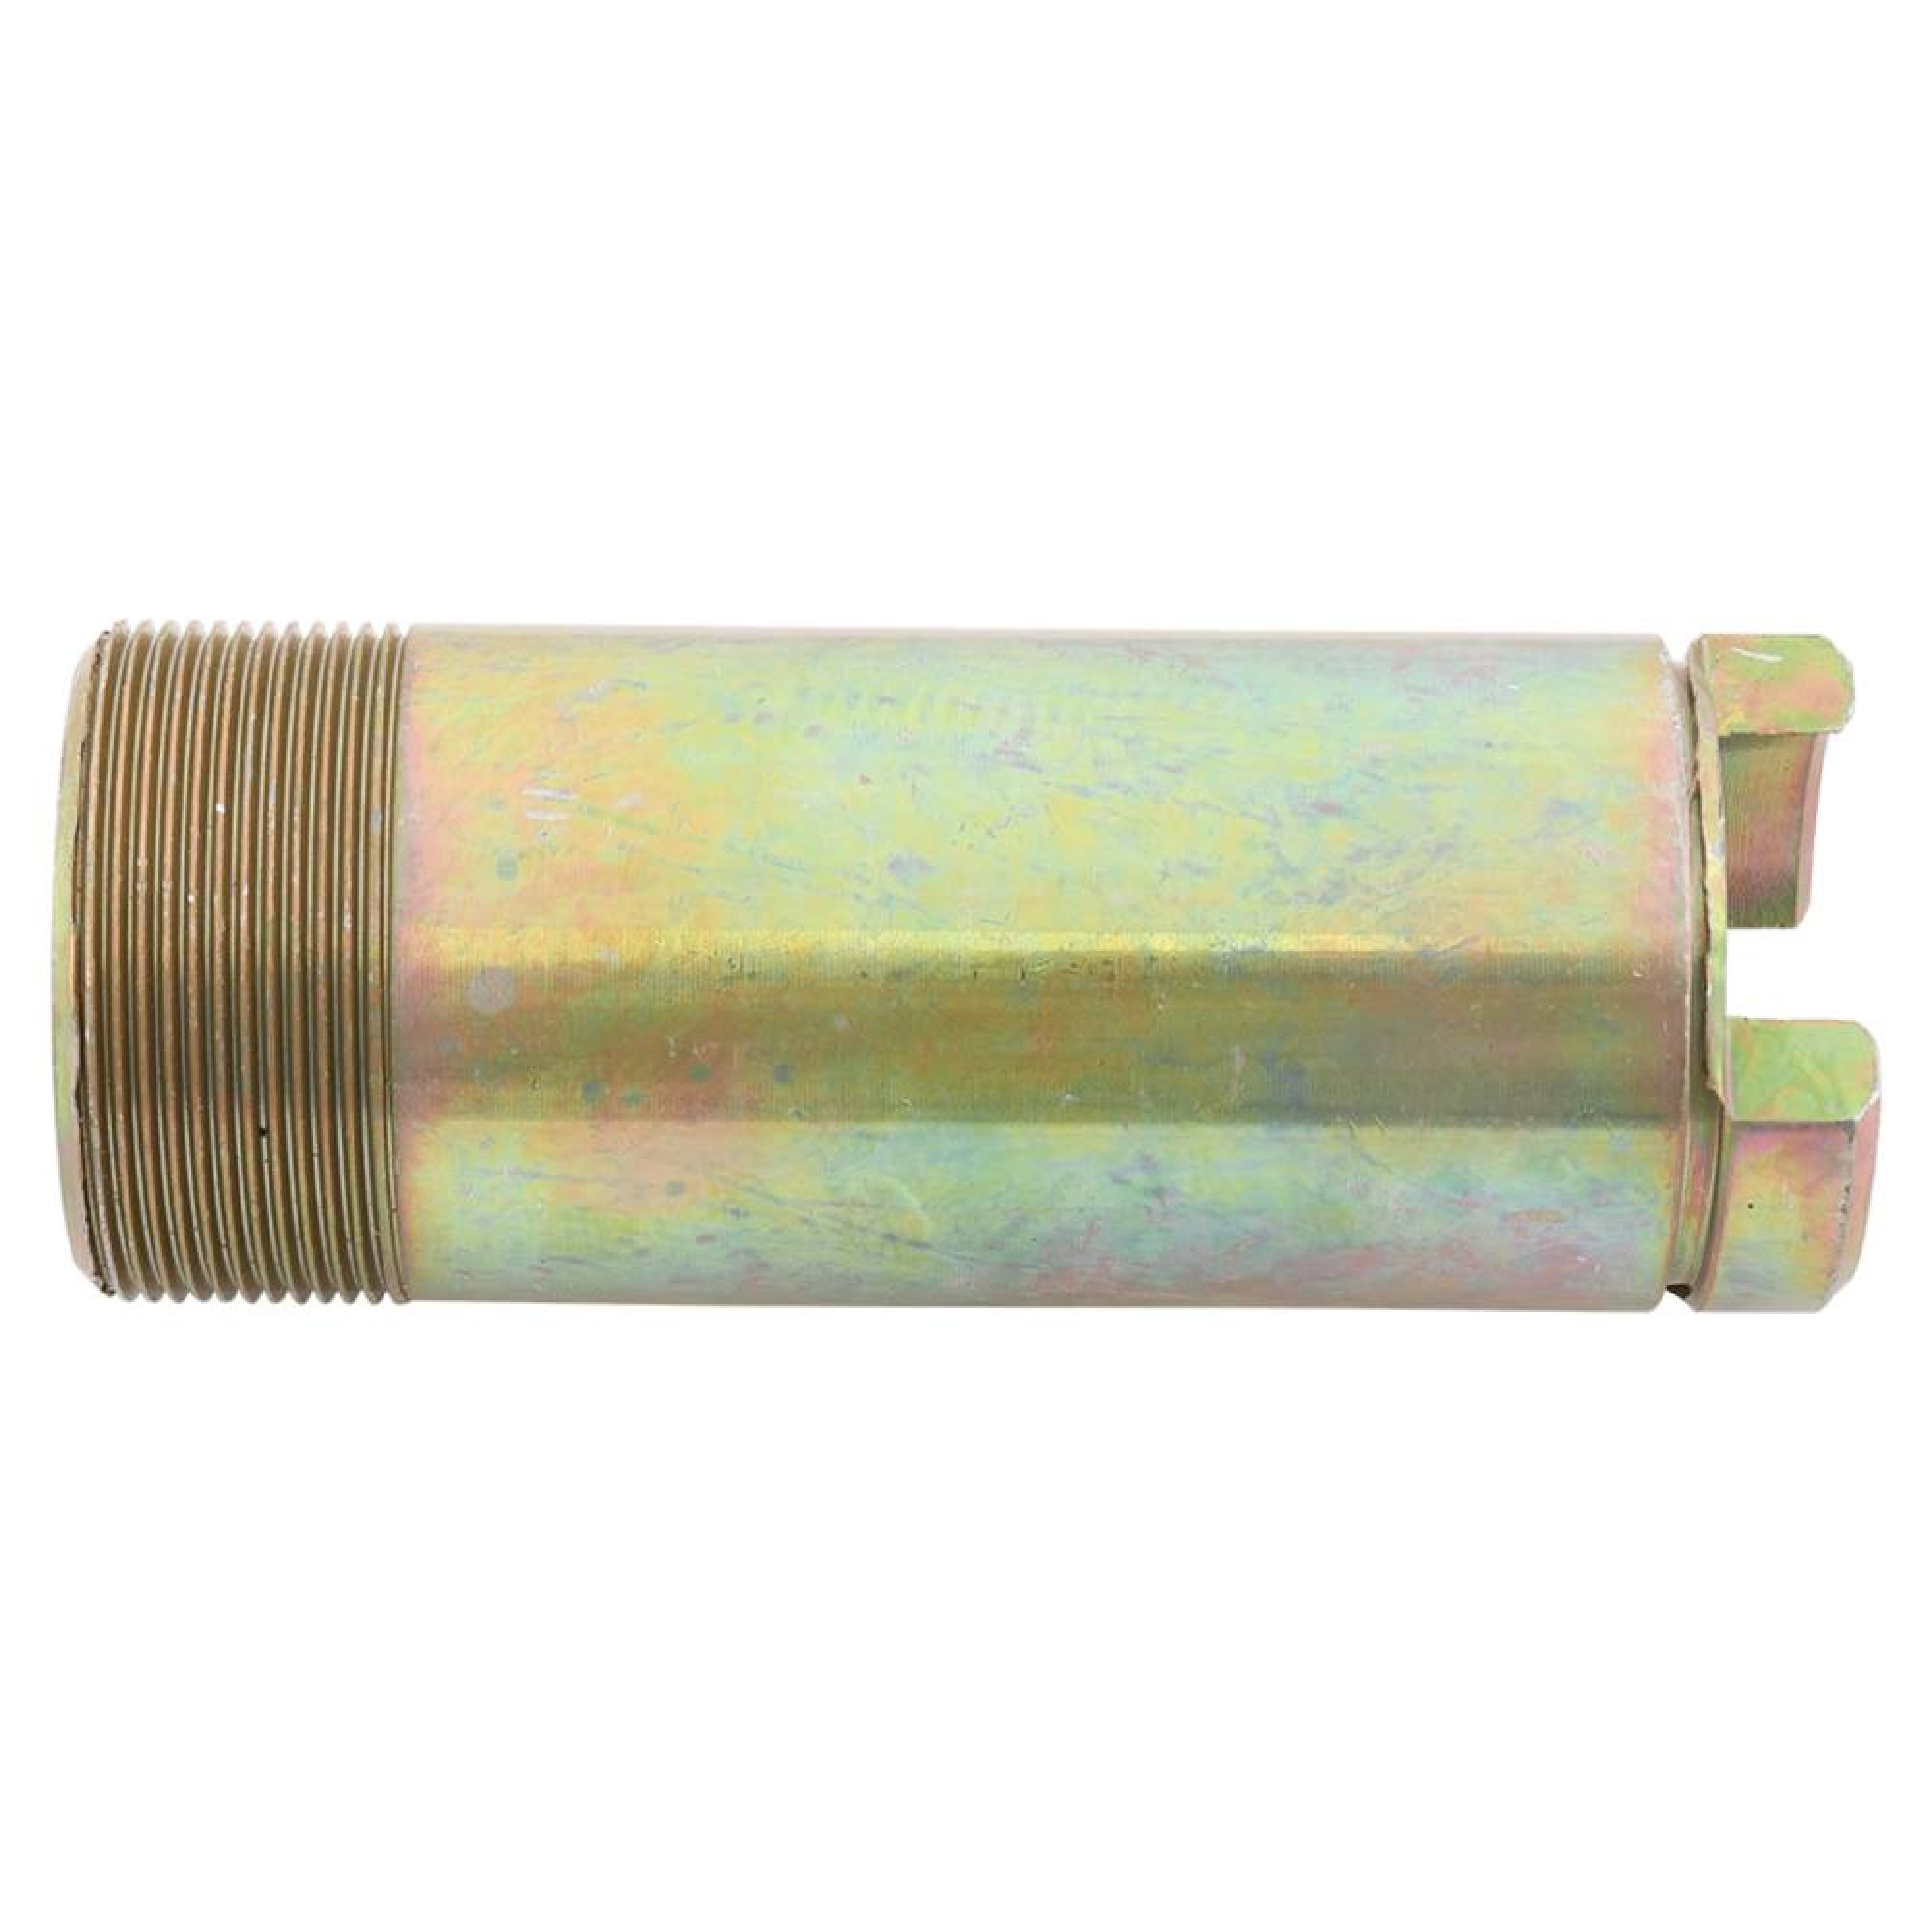 Fits Ford/Fits New Holland 2120 4 Cyl 63-64; 2N Light 12 Volt 